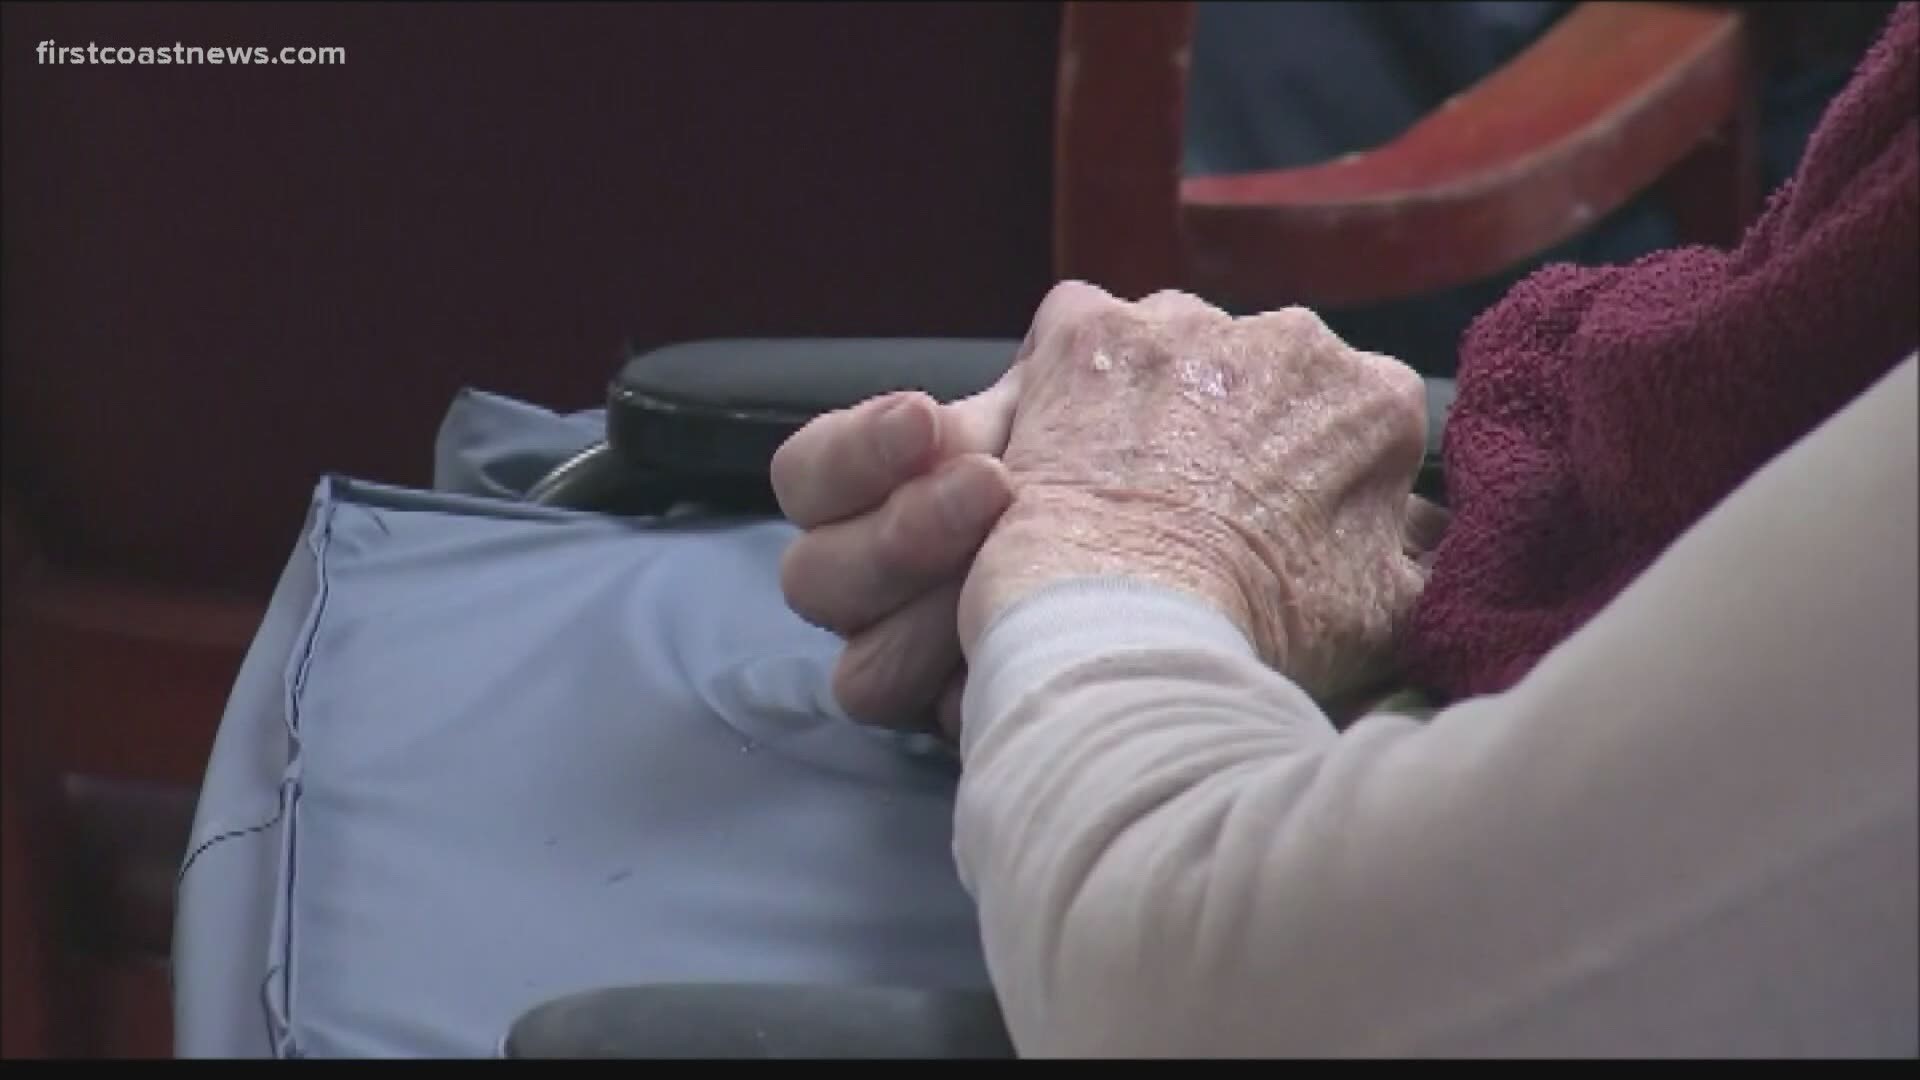 New changes to nursing home restrictions